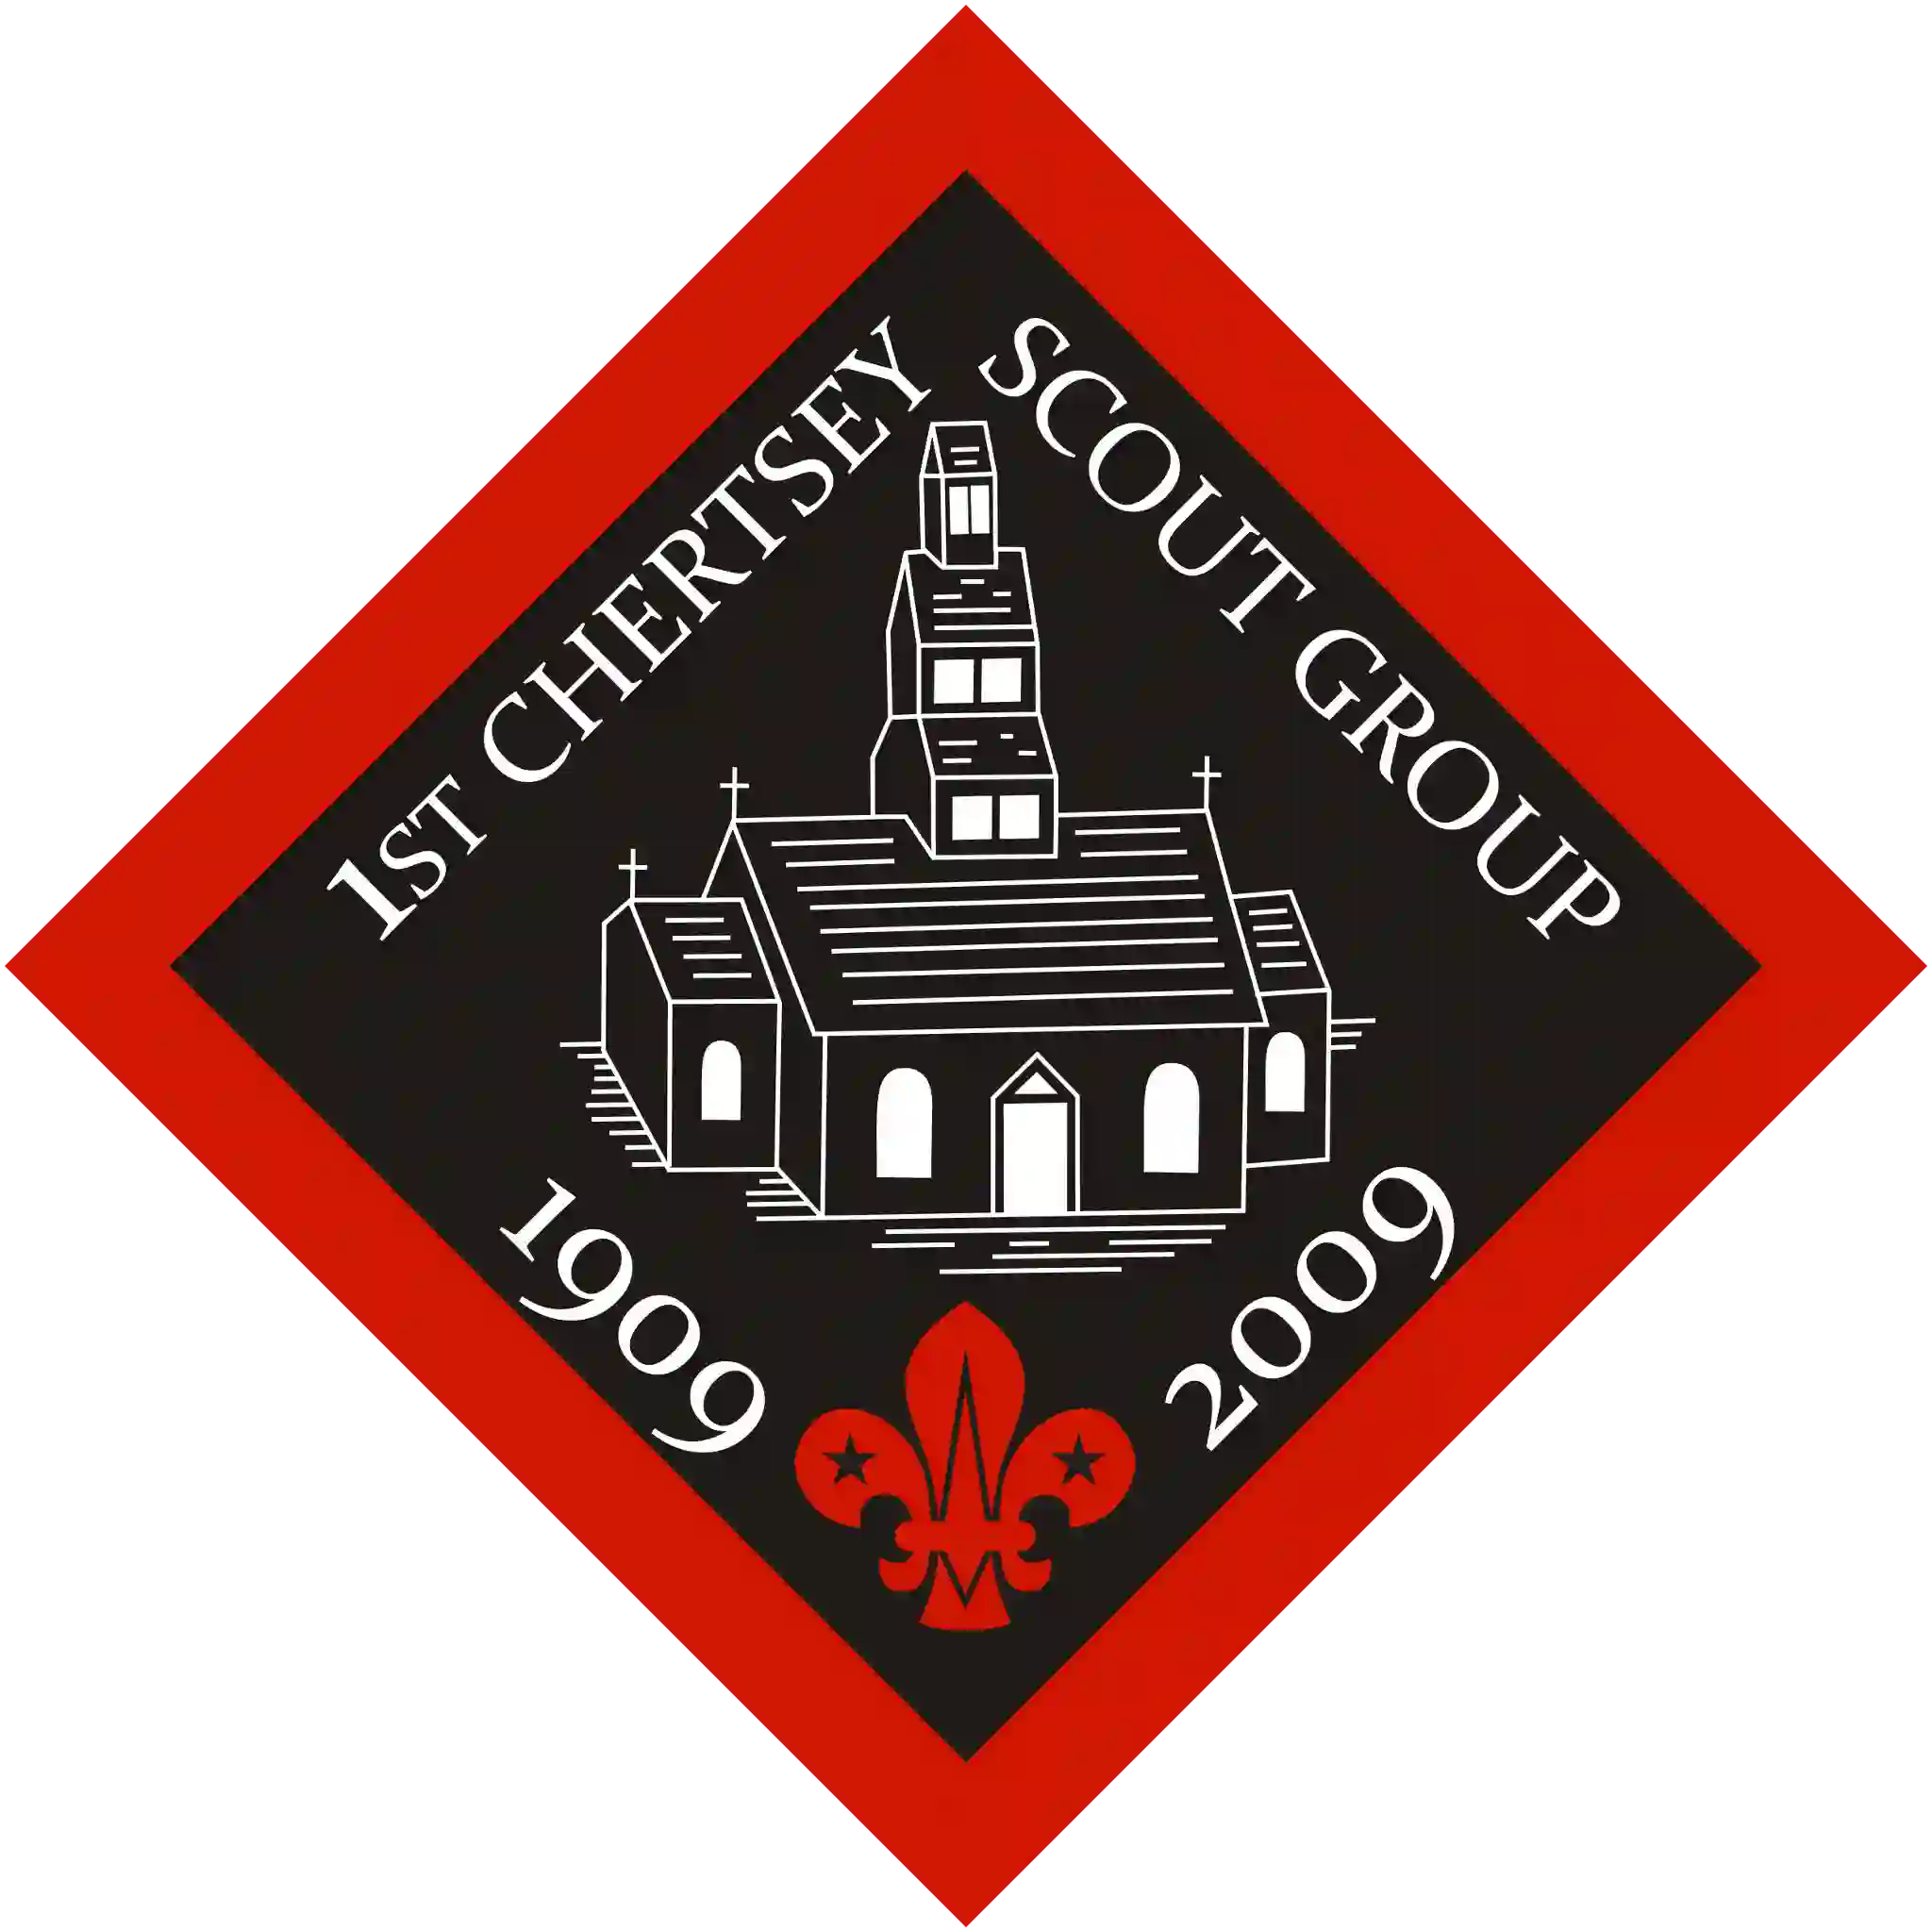 The 1st Chertsey Scout Group badge